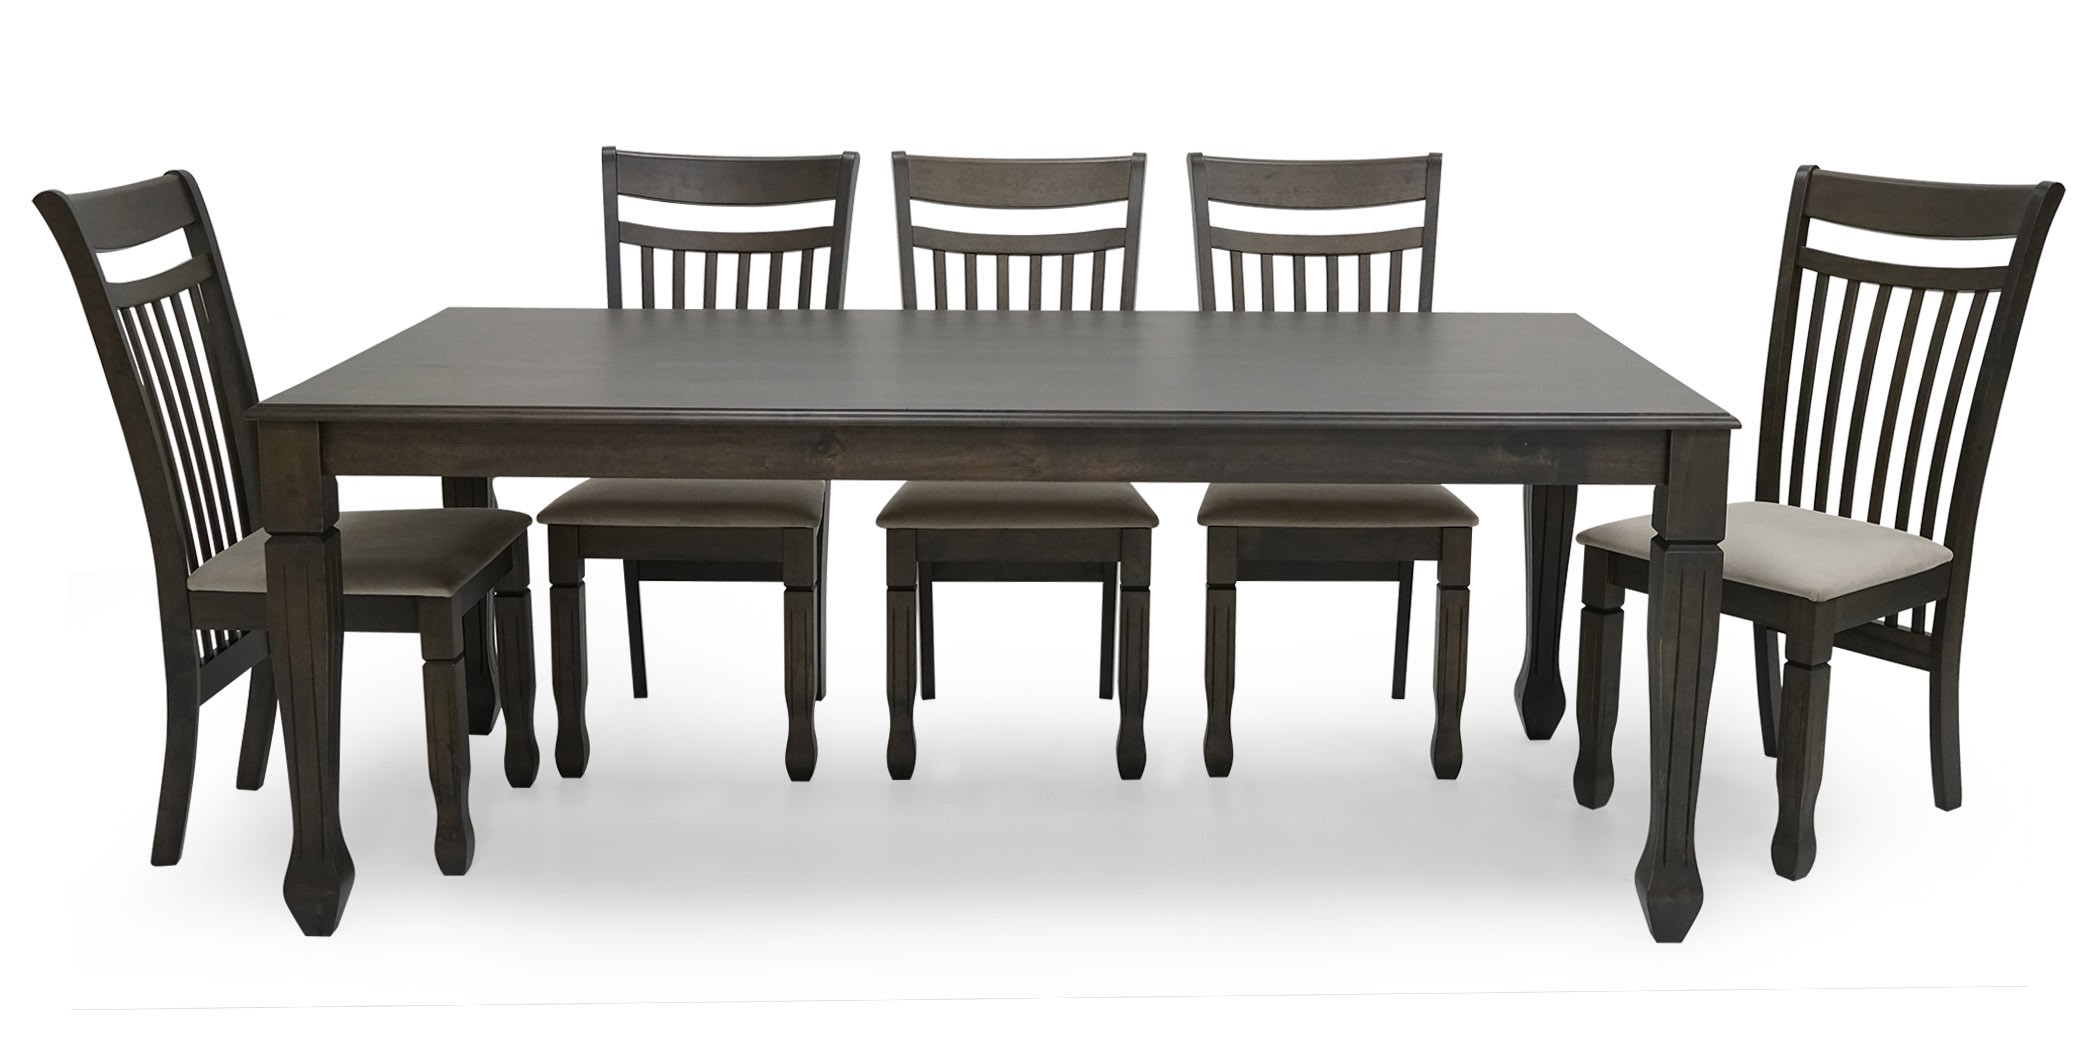 Lexus Table and 8 Chairs Brown Rubberwood